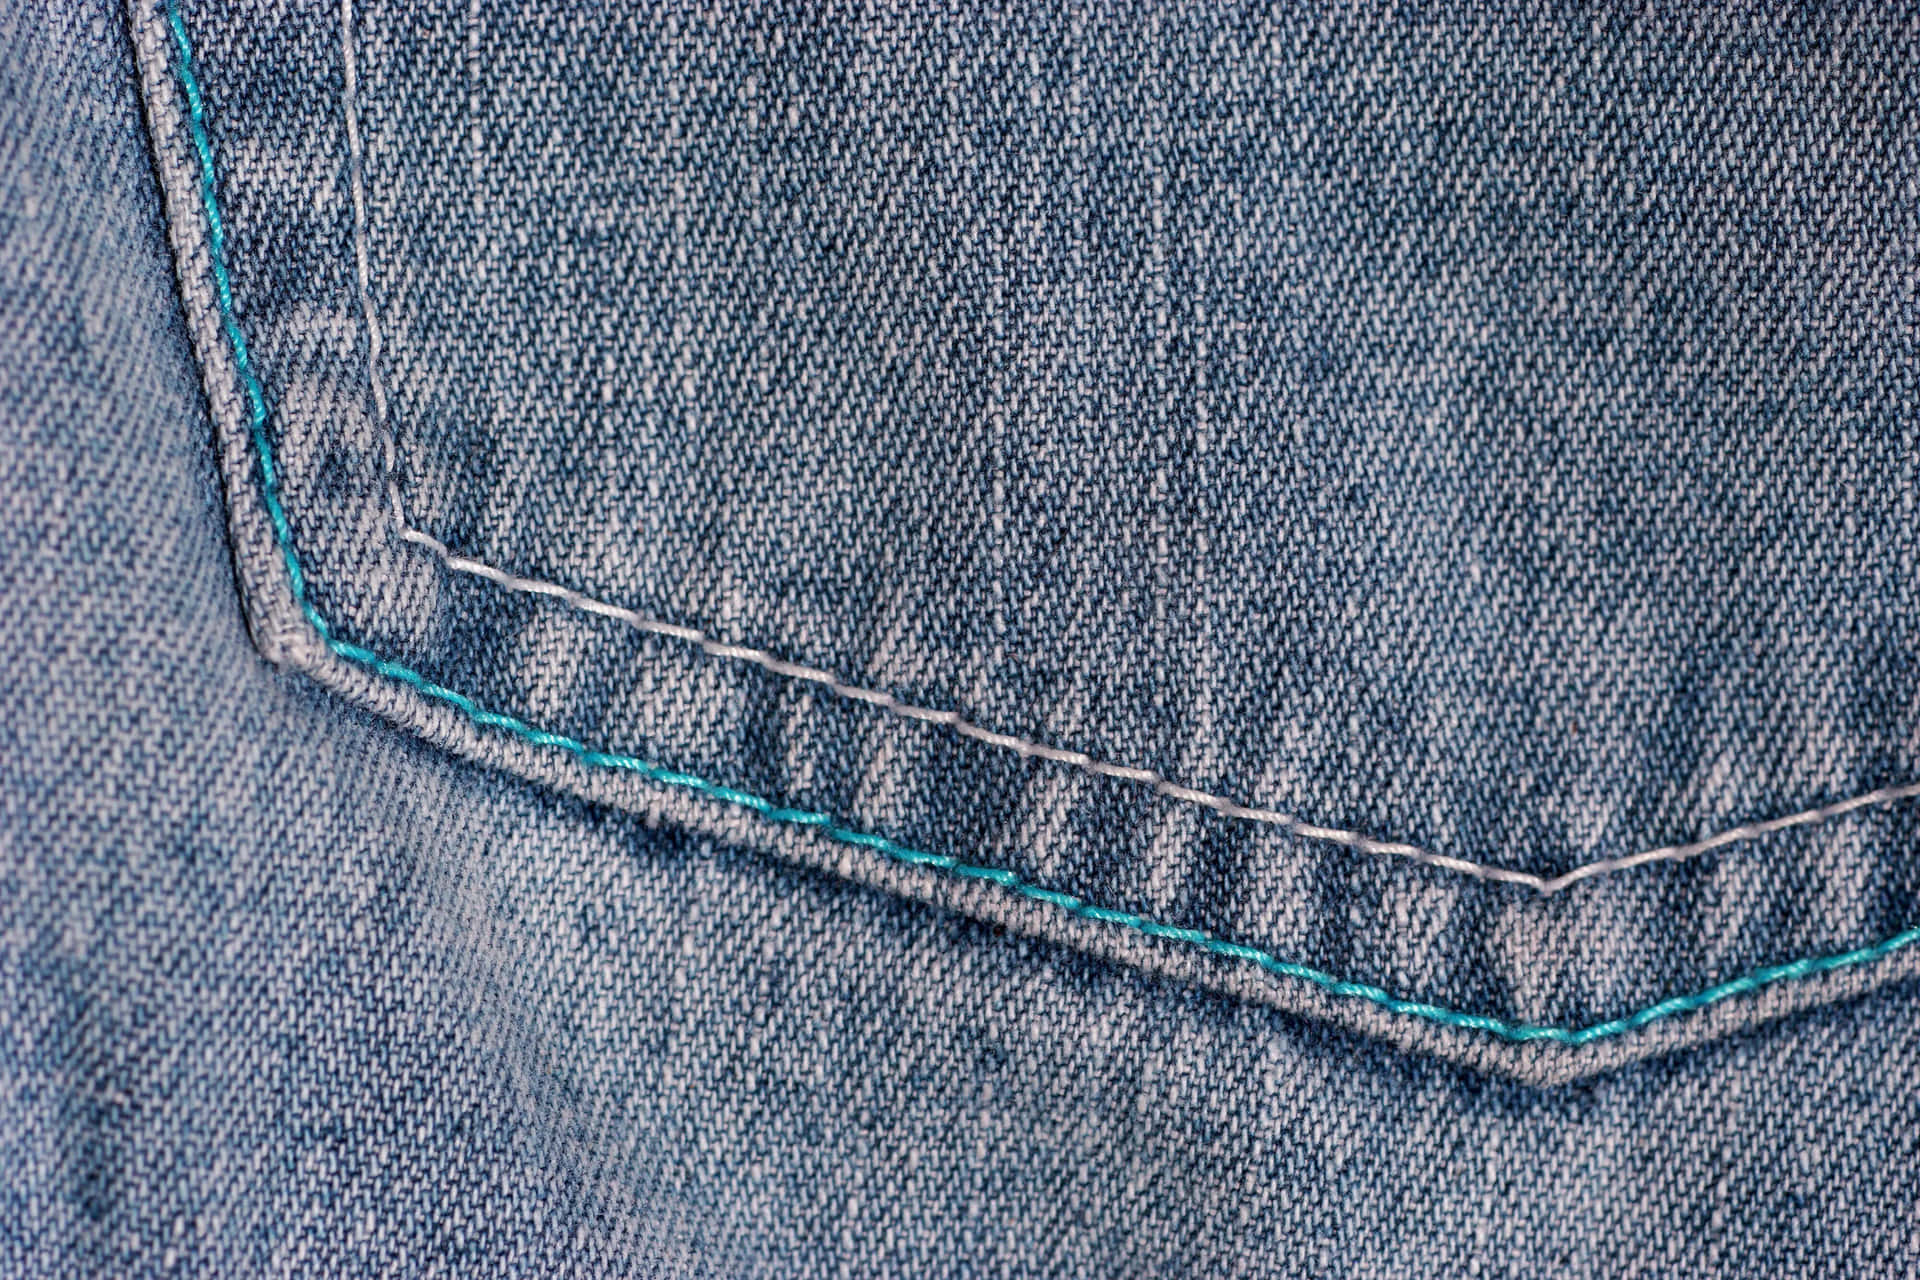 Get Ready to Look on Fleek with Our Wide Selection of Denim